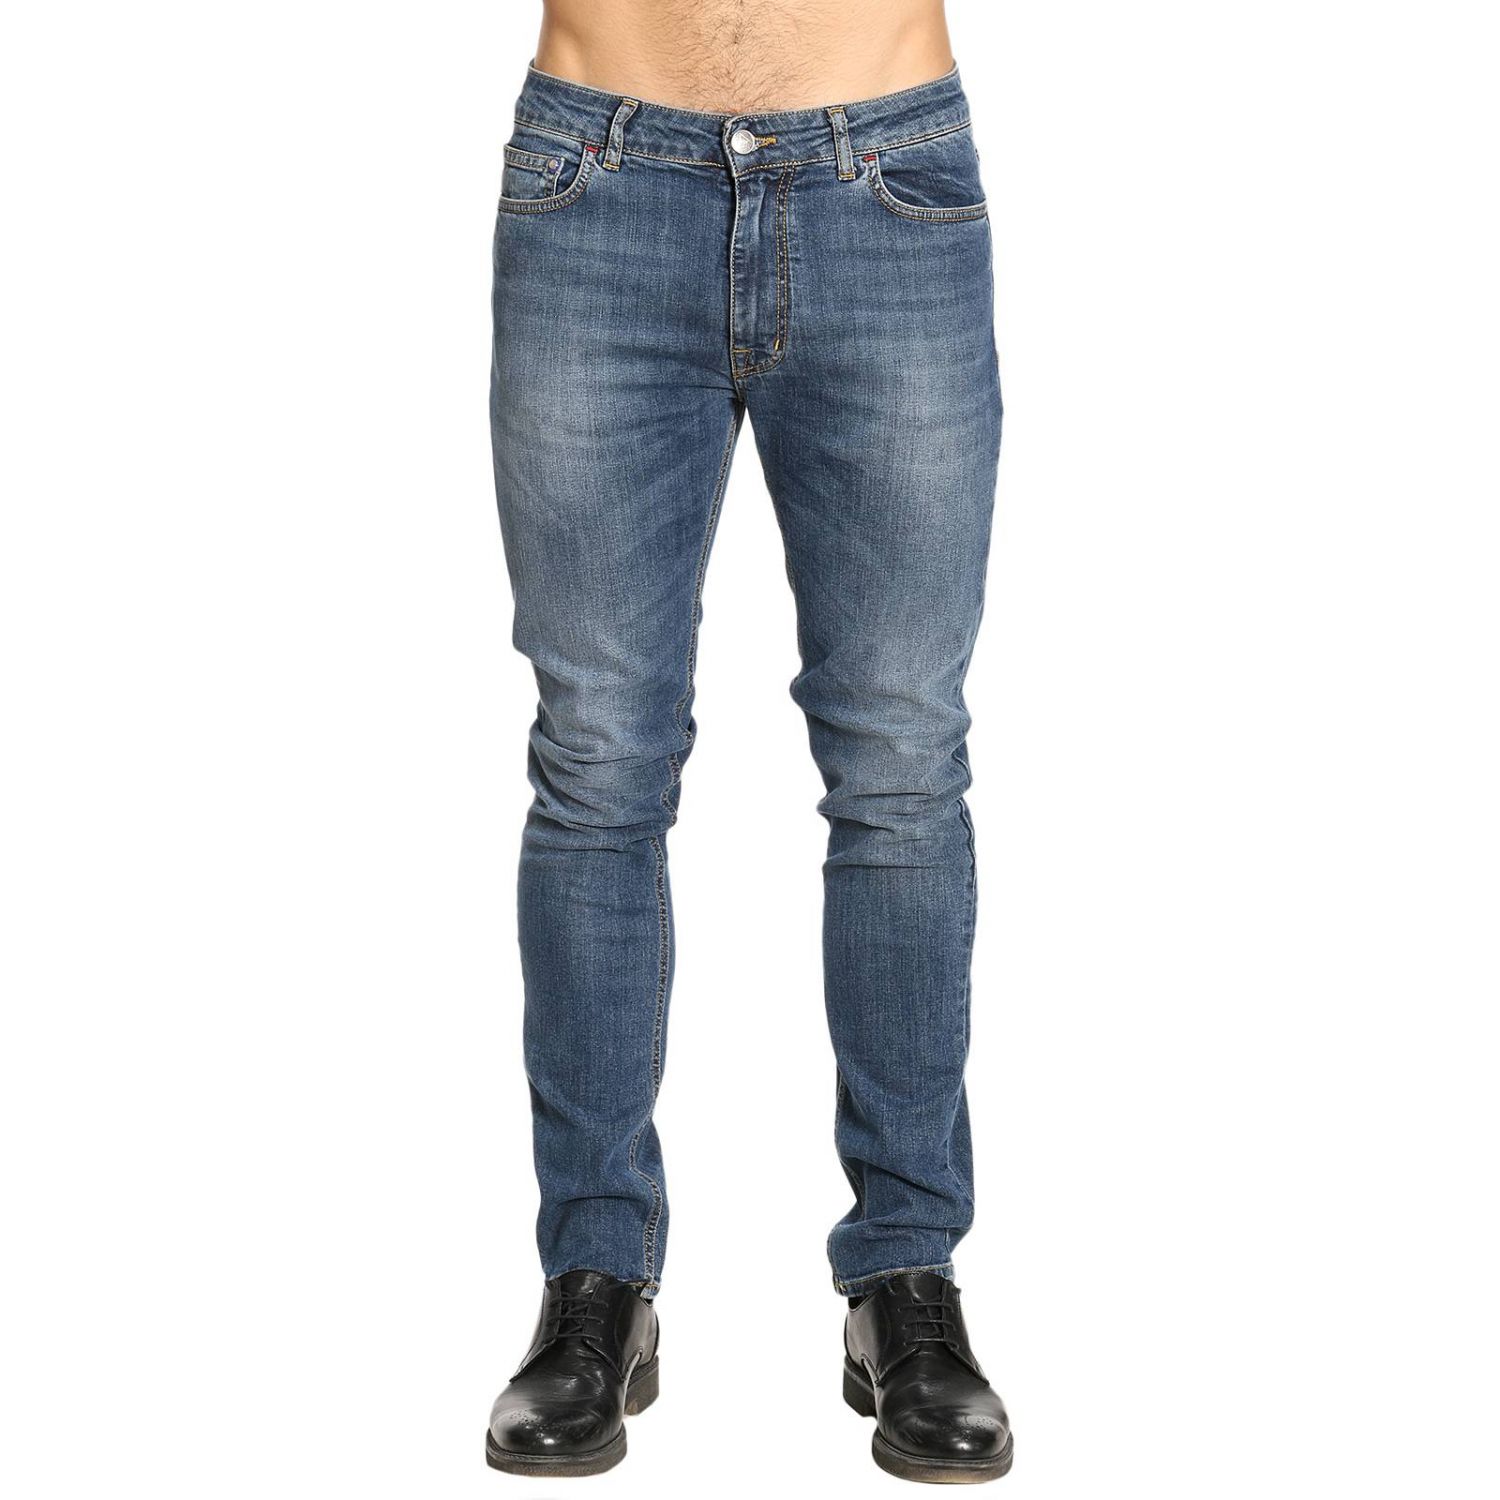 Ice Play Outlet: Jeans men - Denim | Jeans Ice Play 2SK4 6014 GIGLIO.COM